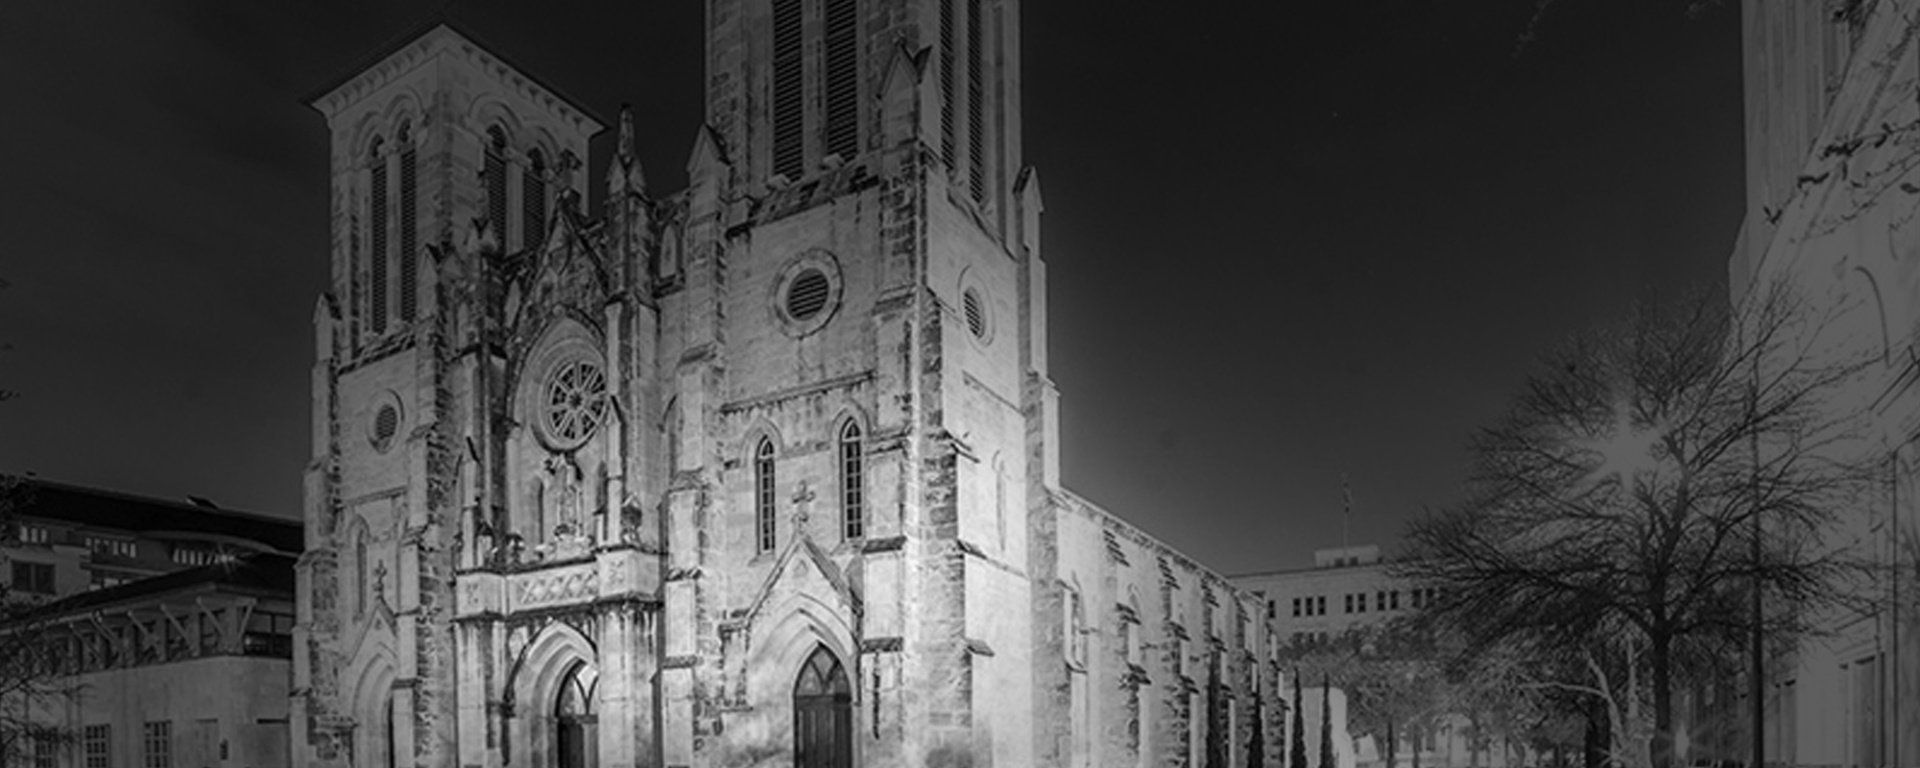 An image of the San Fernando Cathedral.